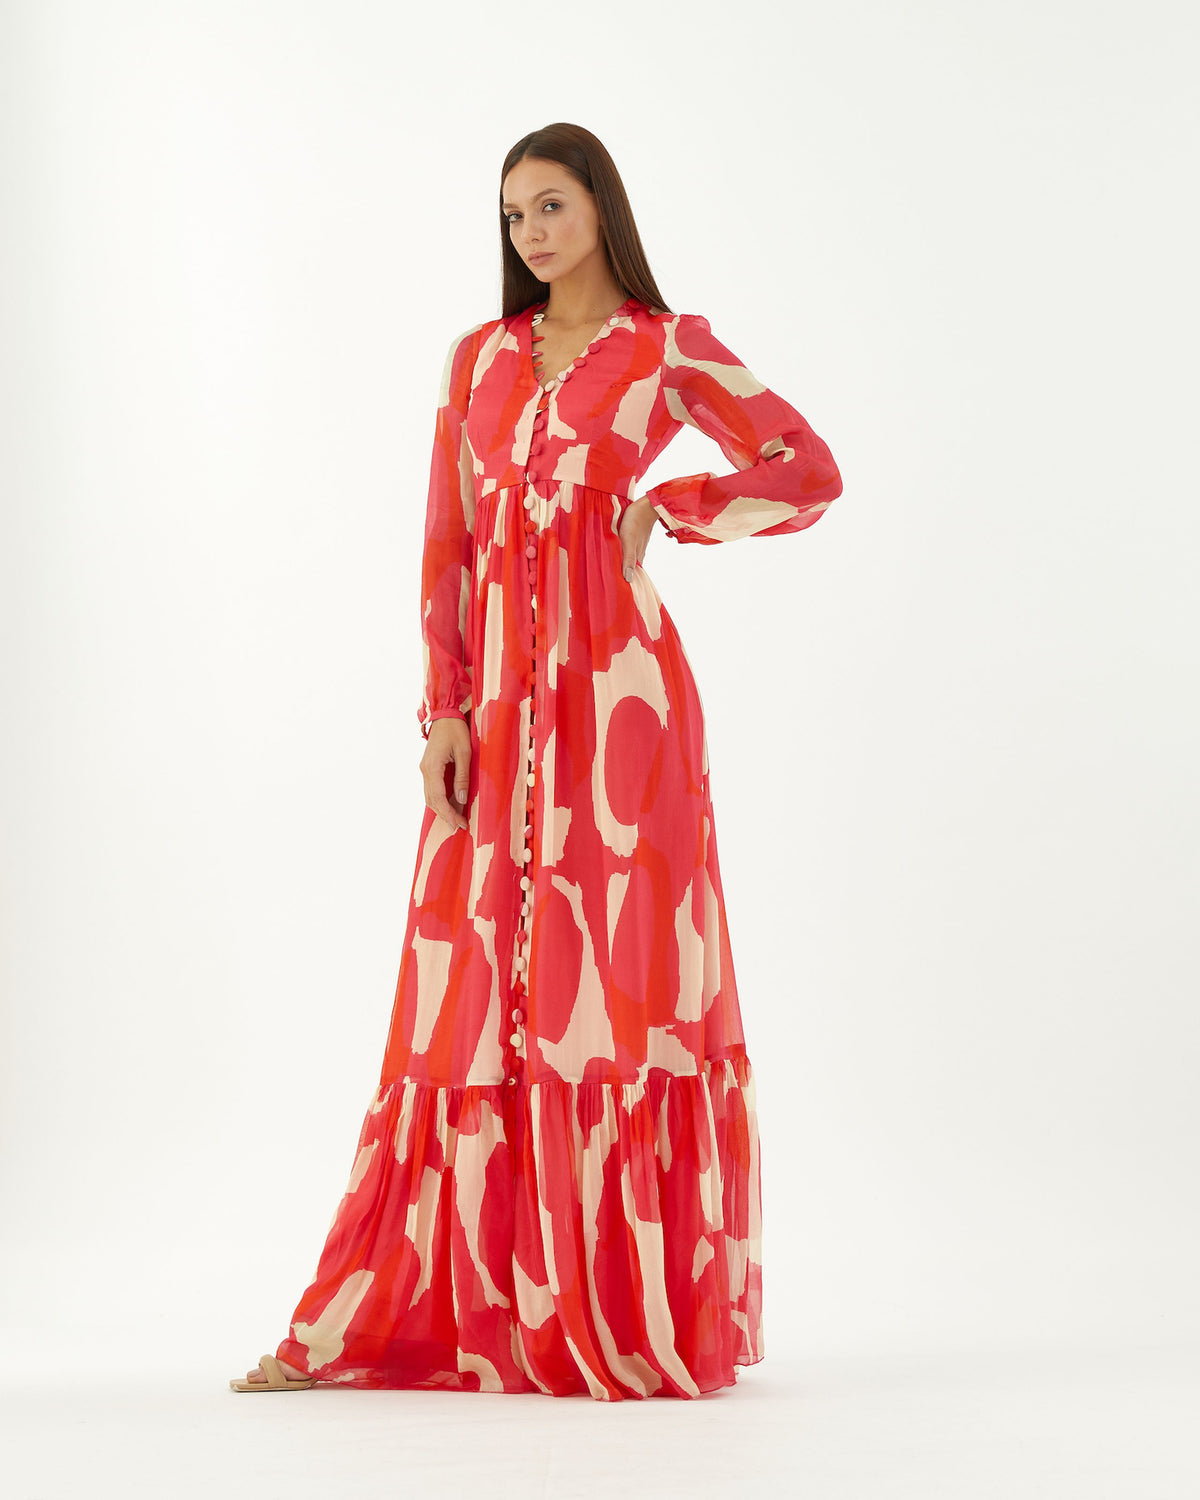 HOT PINK, RED AND BEIGE ABSTRACT LONG DRESS